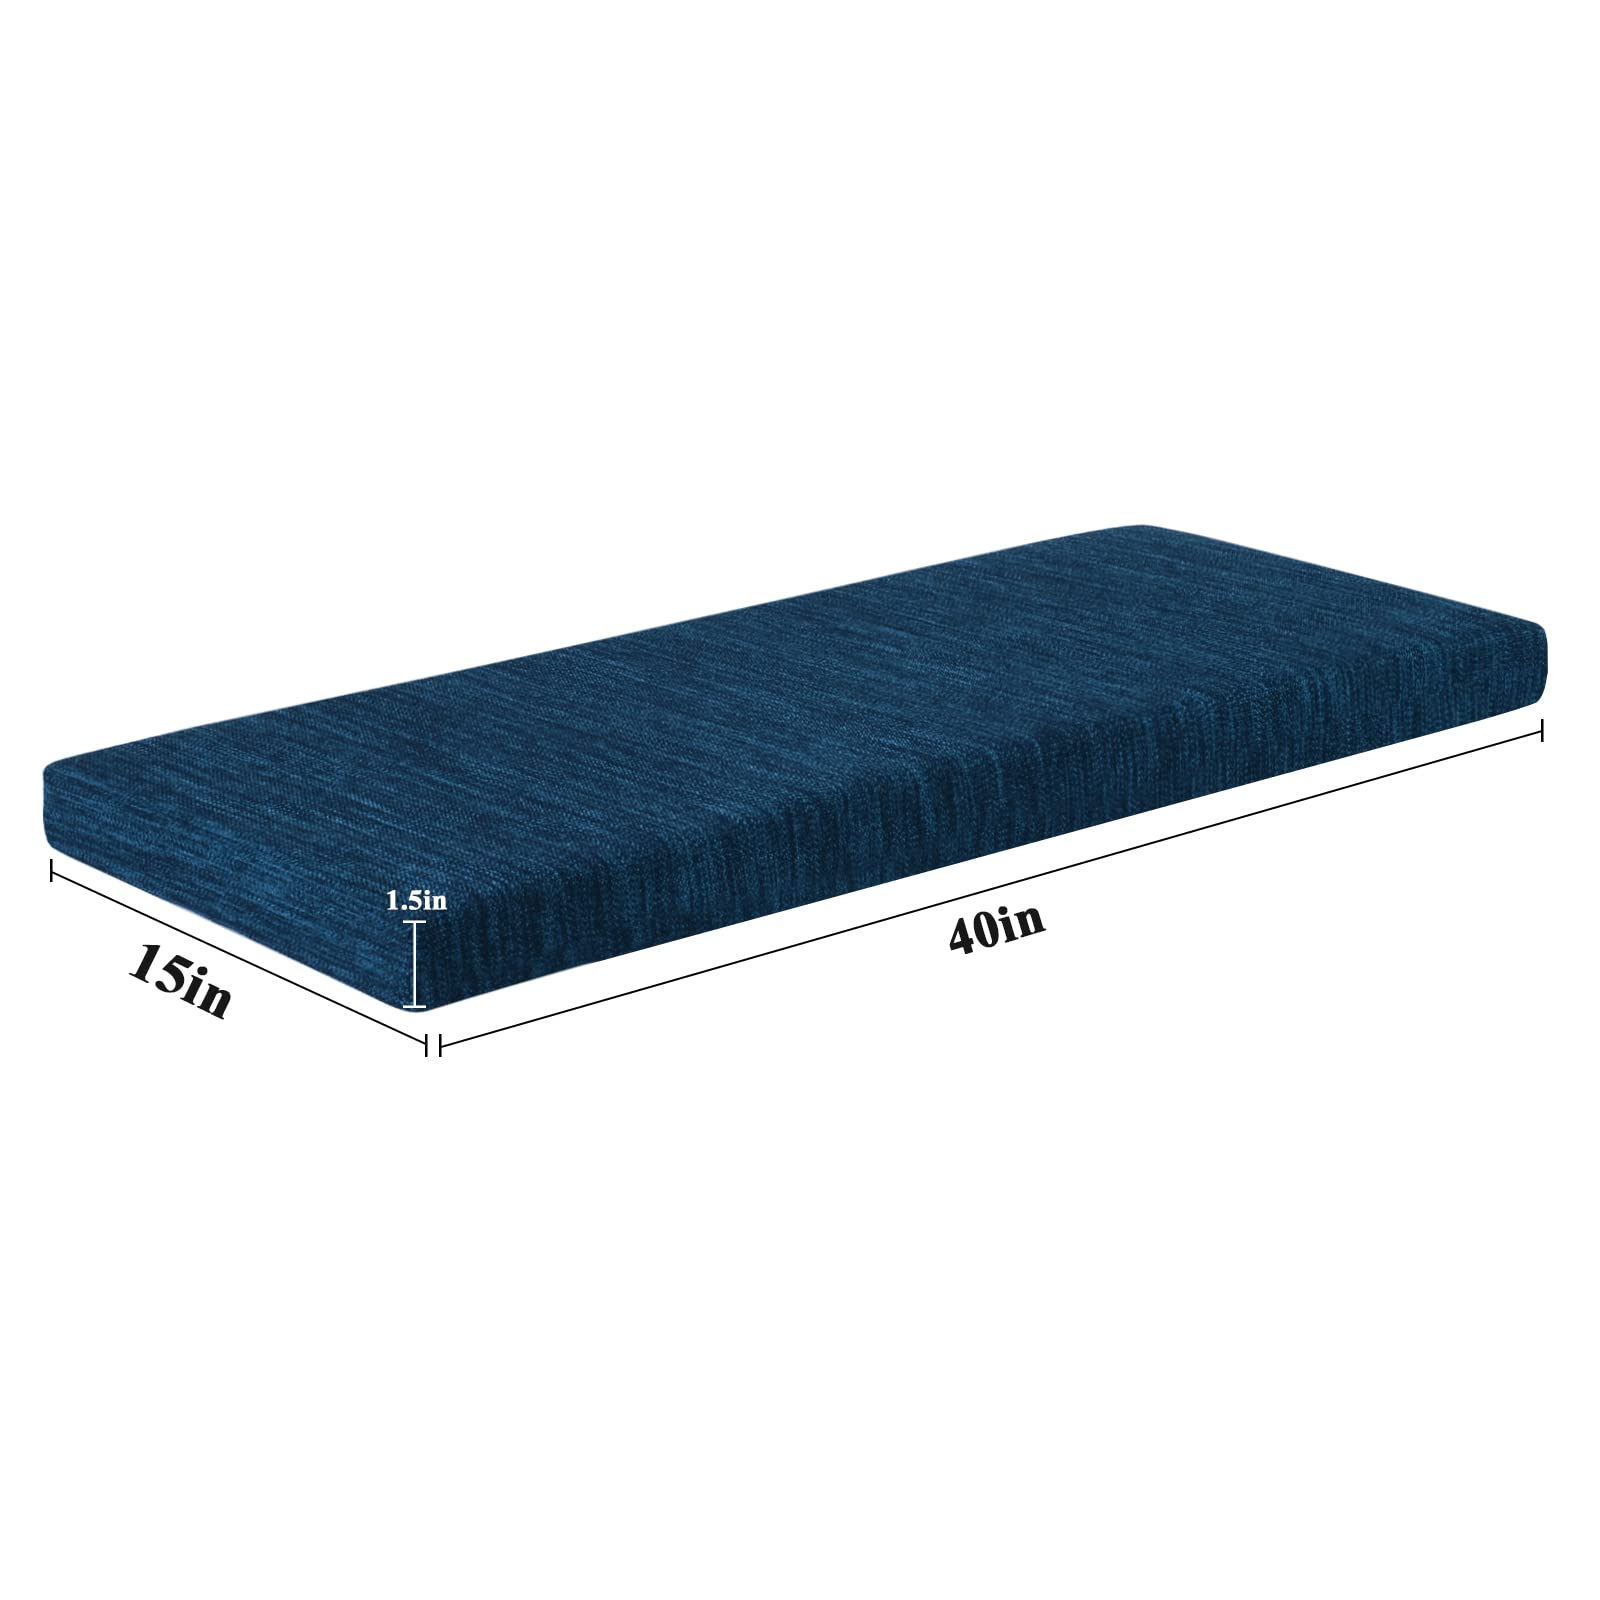 baibu 40 Inch Metal Bench Cushion with Ties, Non-Slip Rectangle Bench Seat Cushion Kitchen Bench Cushion with Machine Washable Cover - One Pad Only (Dark Blue, 40x15x1.5in)